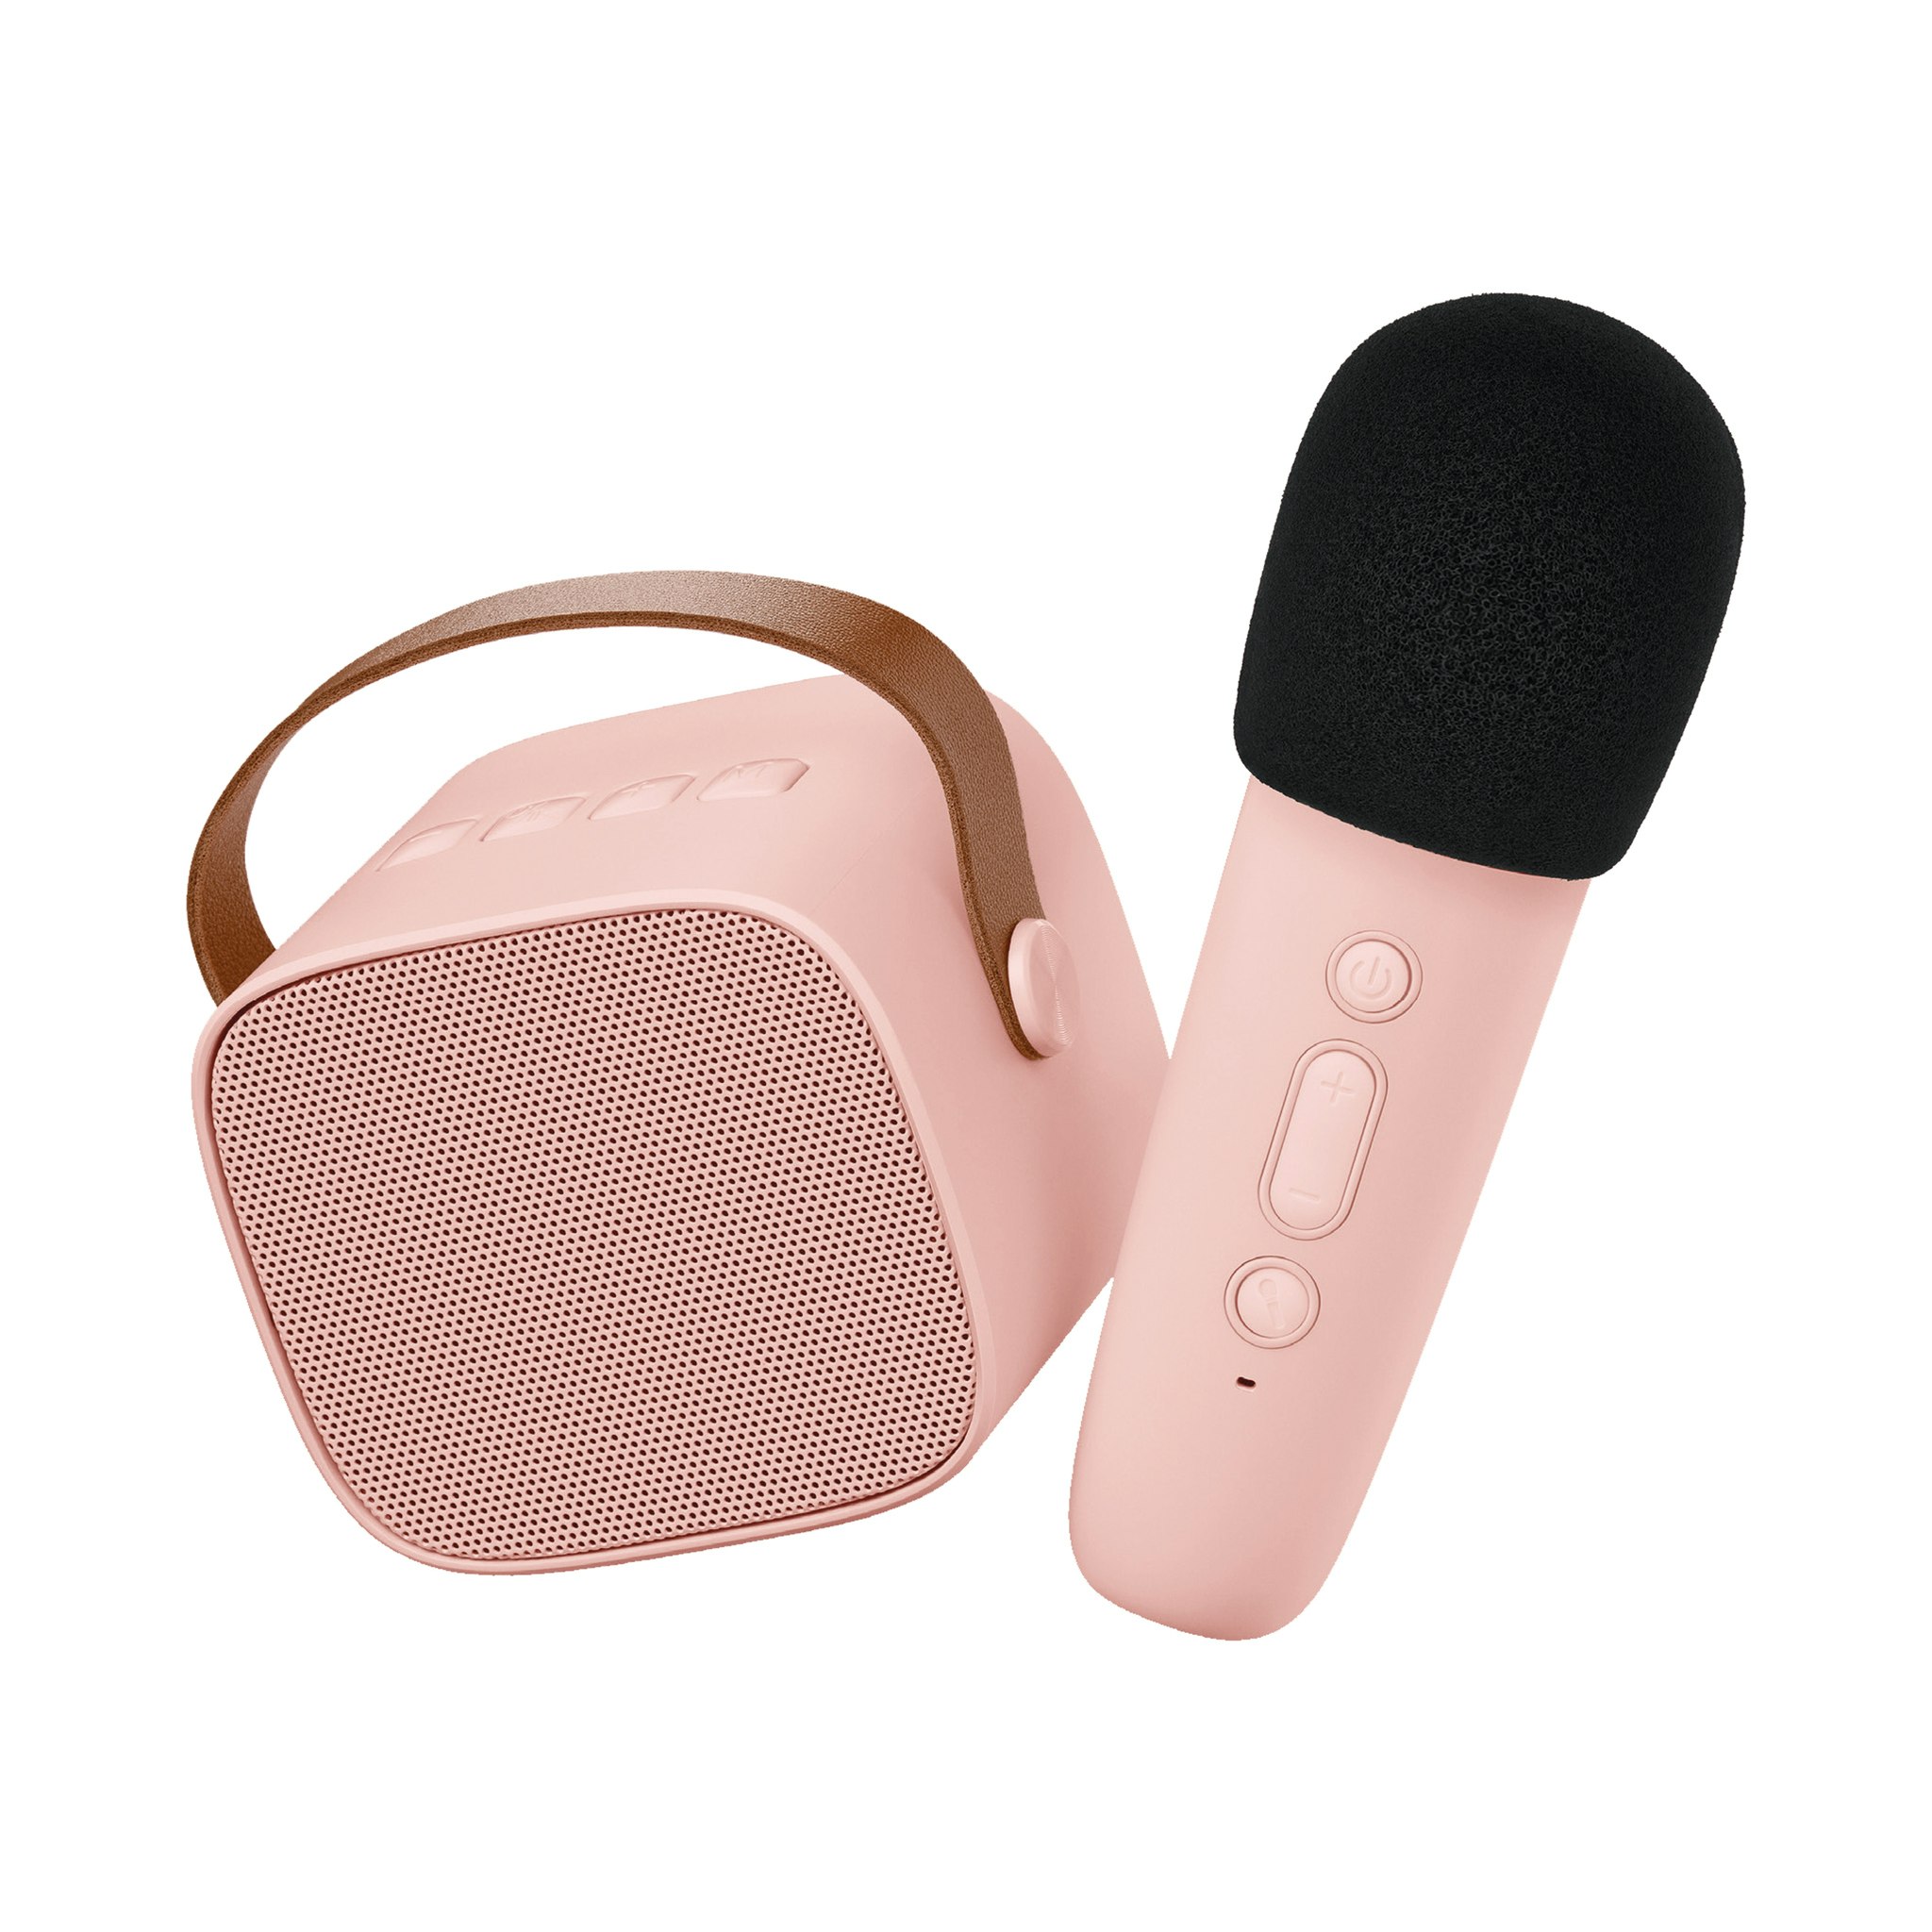 Lalarma- Bluetooth Speaker With Wireless Microphone - Rose